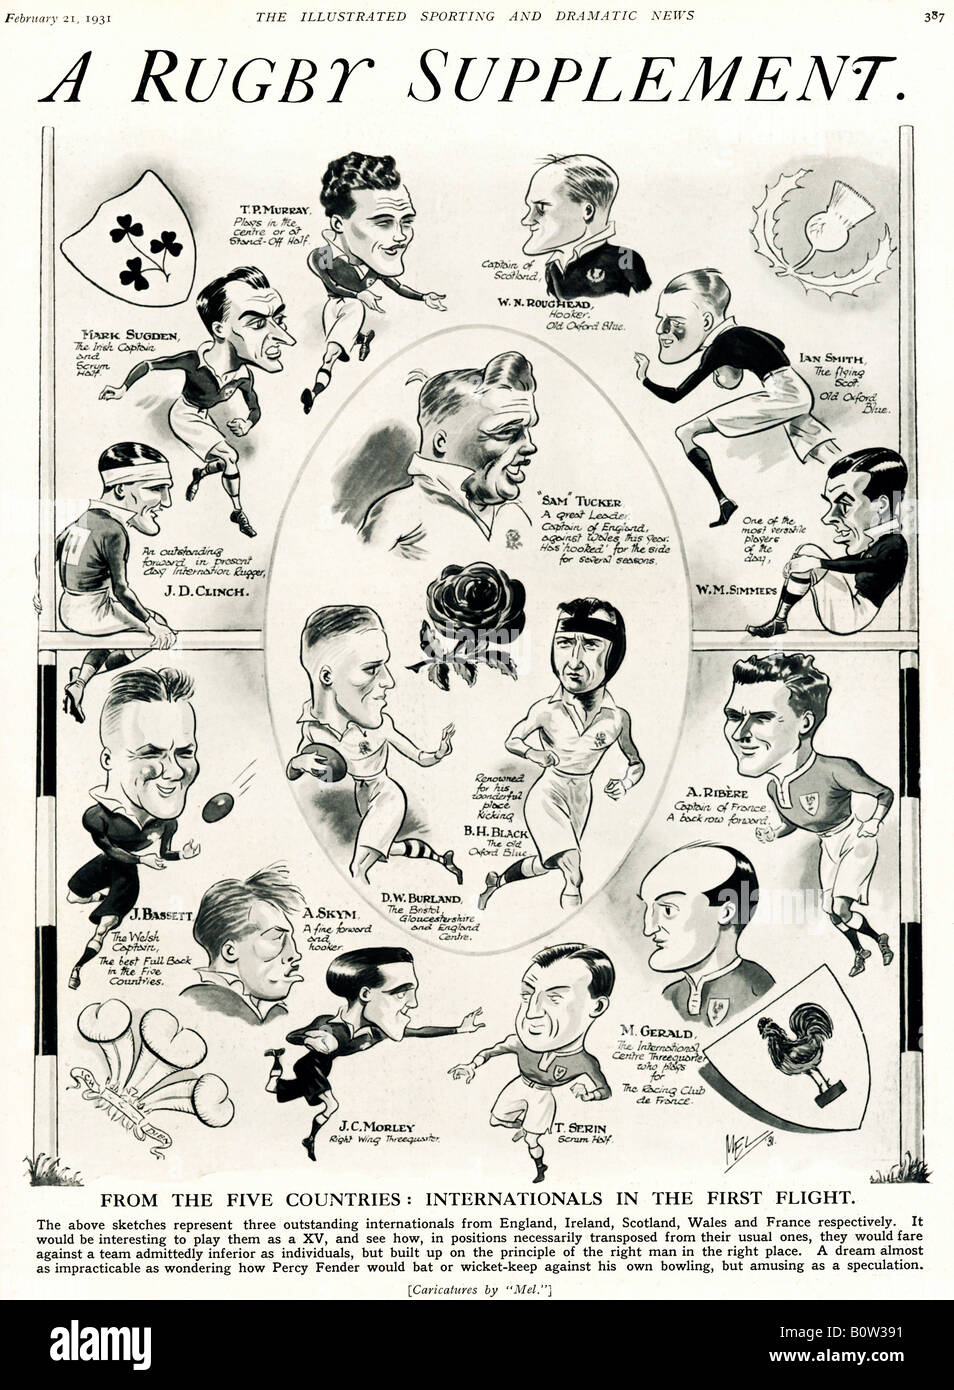 Rugby Supplement 1931 cartoon with caricatures of three outstanding rugby players from each of the 5 Nations Stock Photo